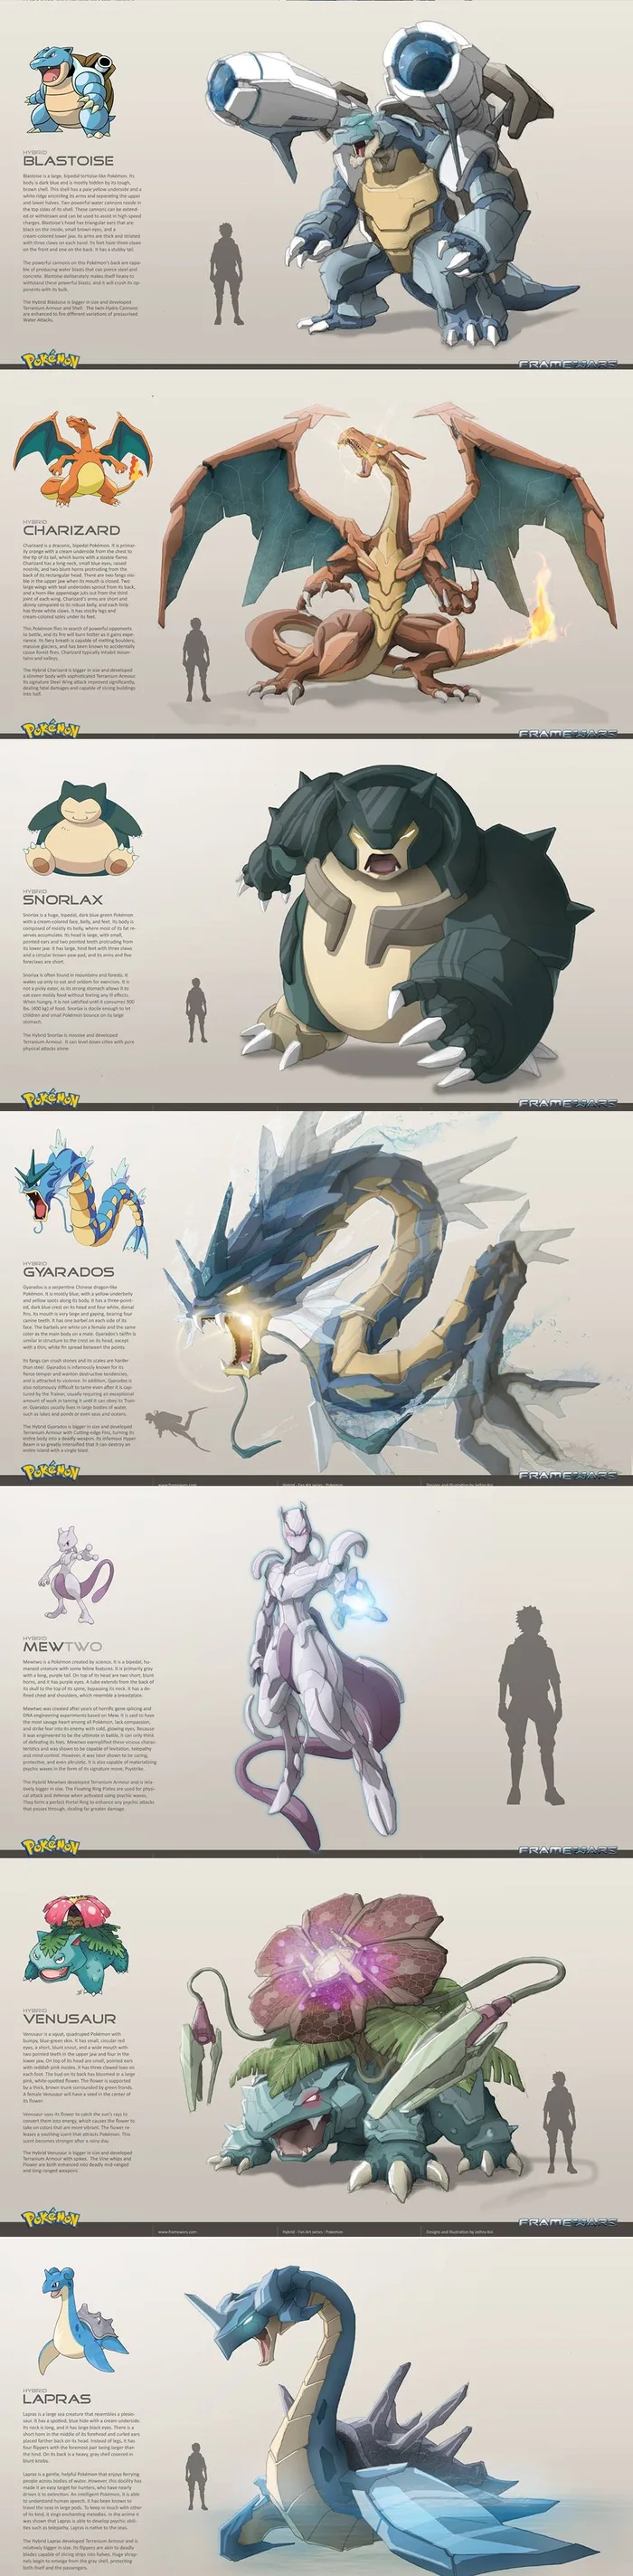 Given the disappointment surrounding Pokemon Sword/Shield, figured I'd make  this comparison - 9GAG